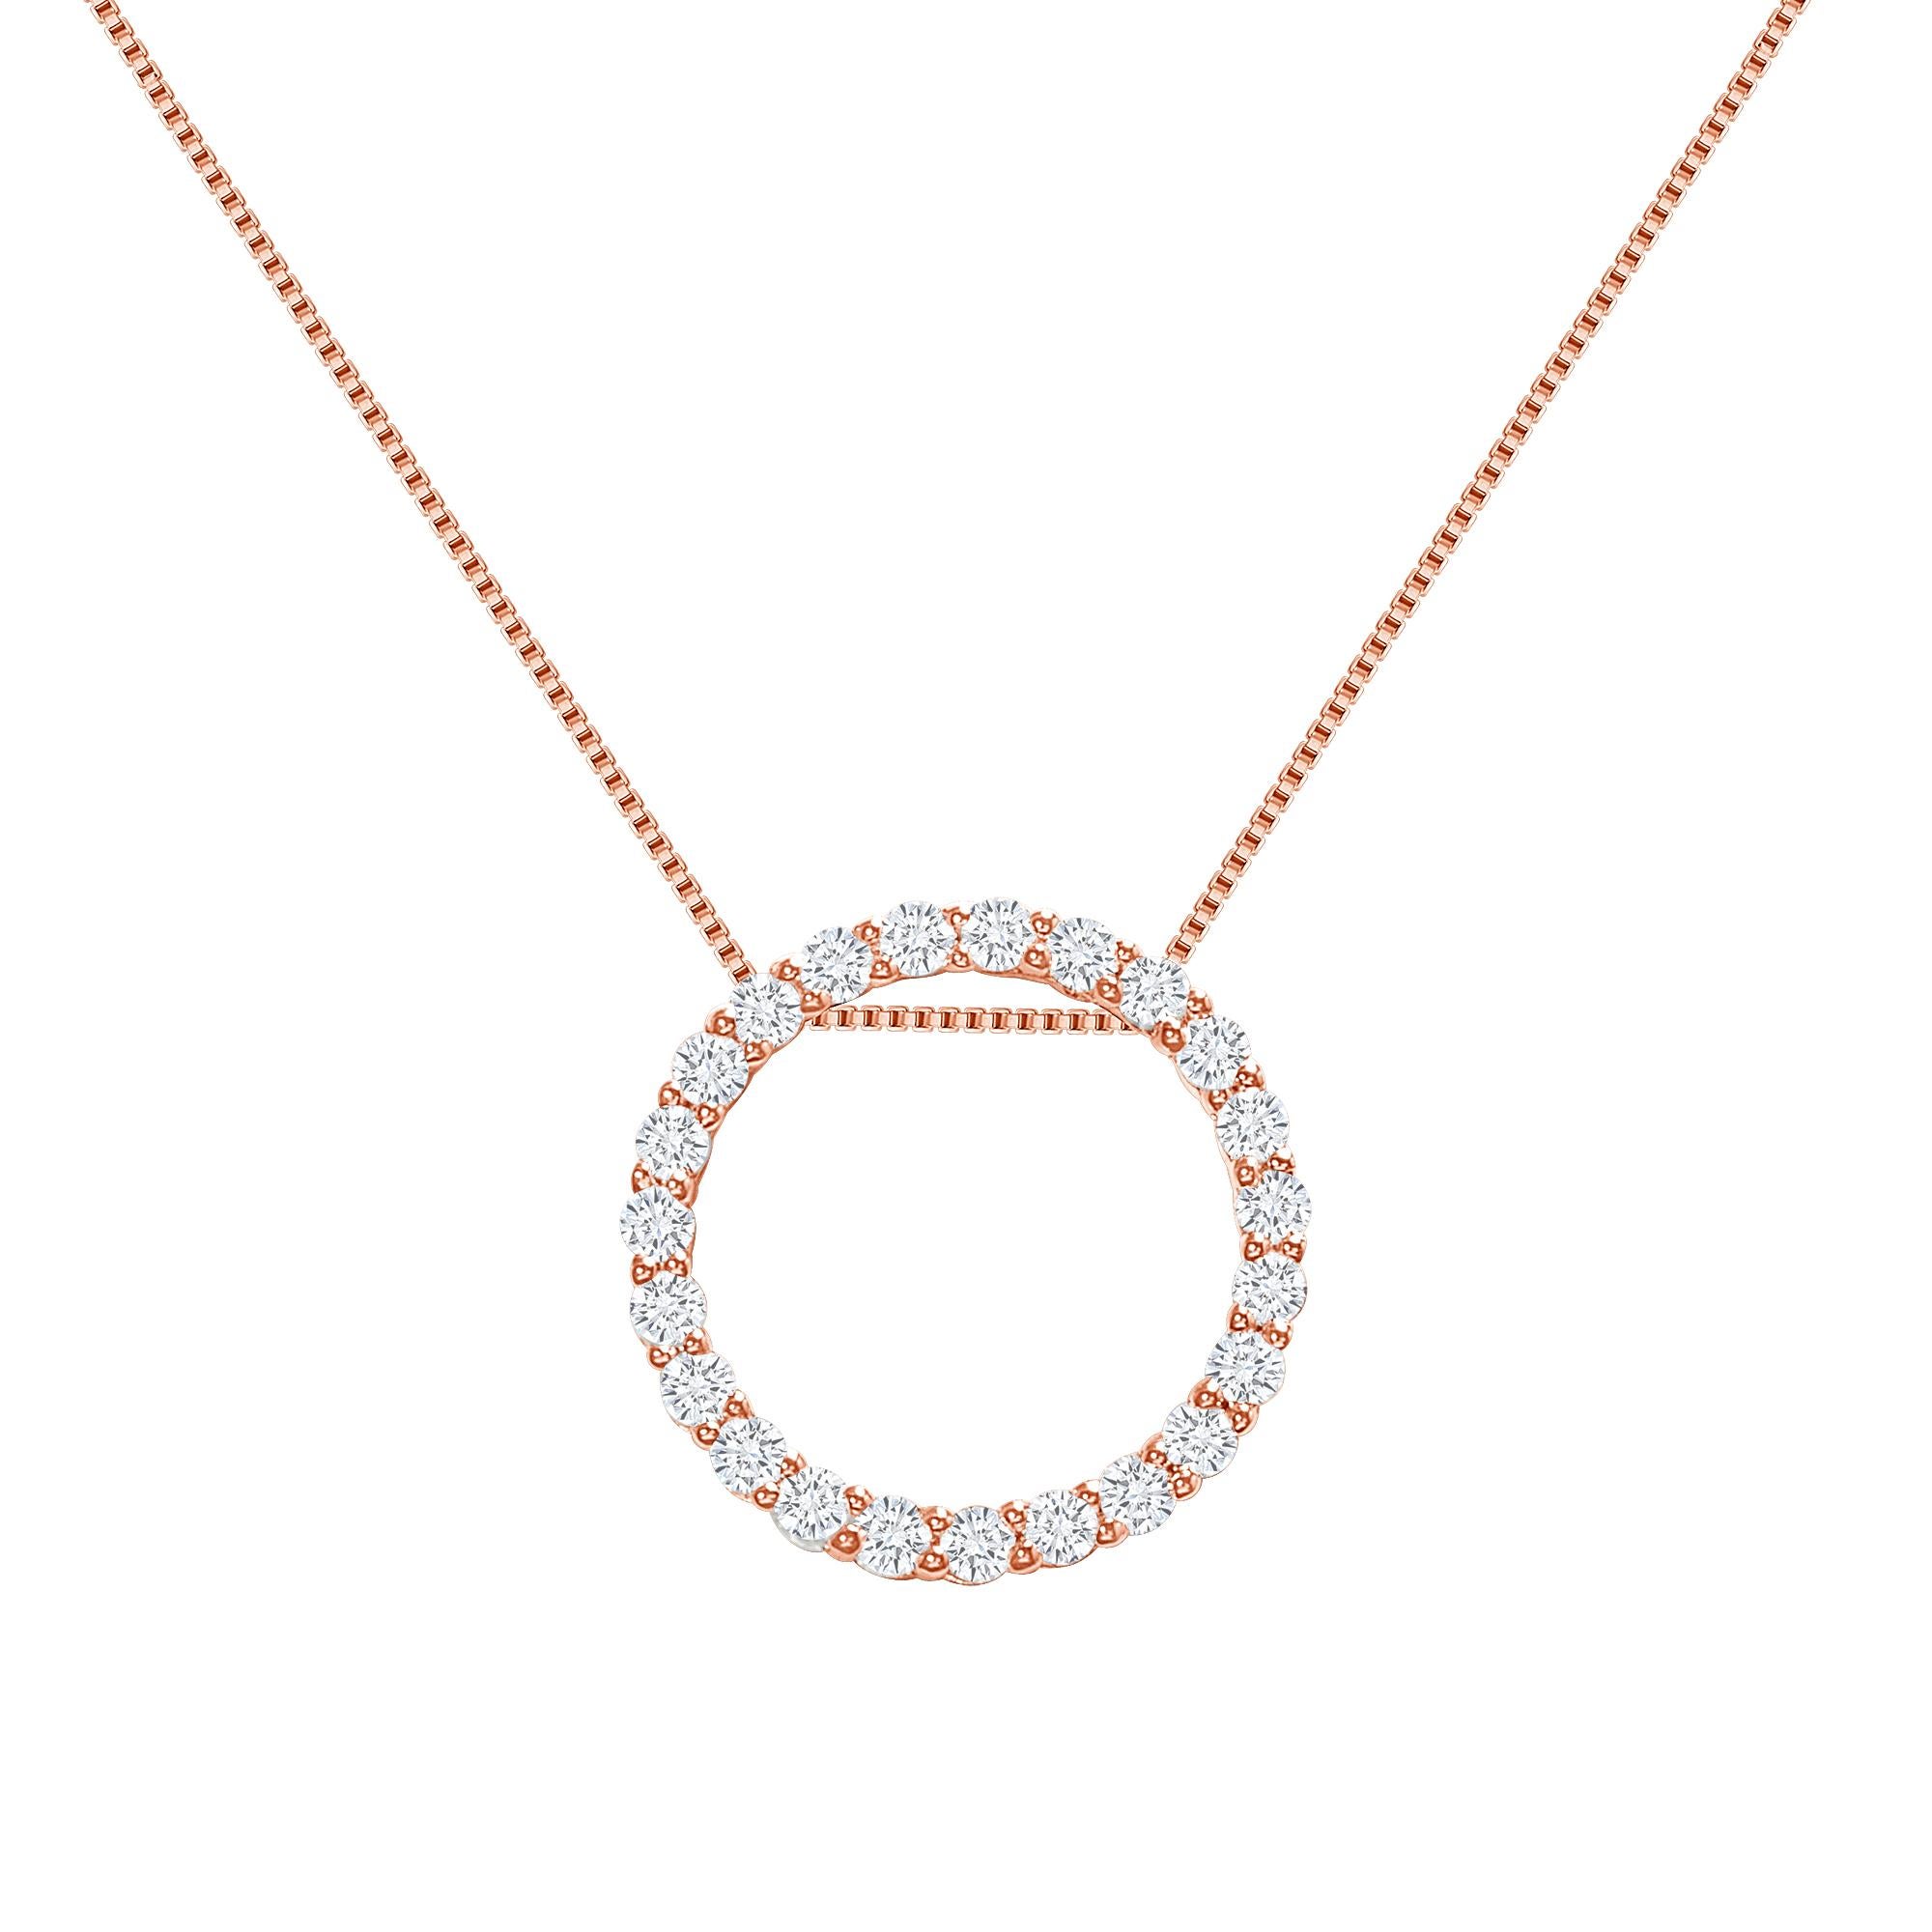 This diamond circle pendant provides a glowing chic look.
Metal: 14k Gold
Diamond Total Carats: 2 carat
Diamond Cut: Round Natural Diamonds (Not Lab Grown)
Diamond Clarity: VS
Diamond Color: F-G
Color: Rose Gold
Necklace Length: 16 inches